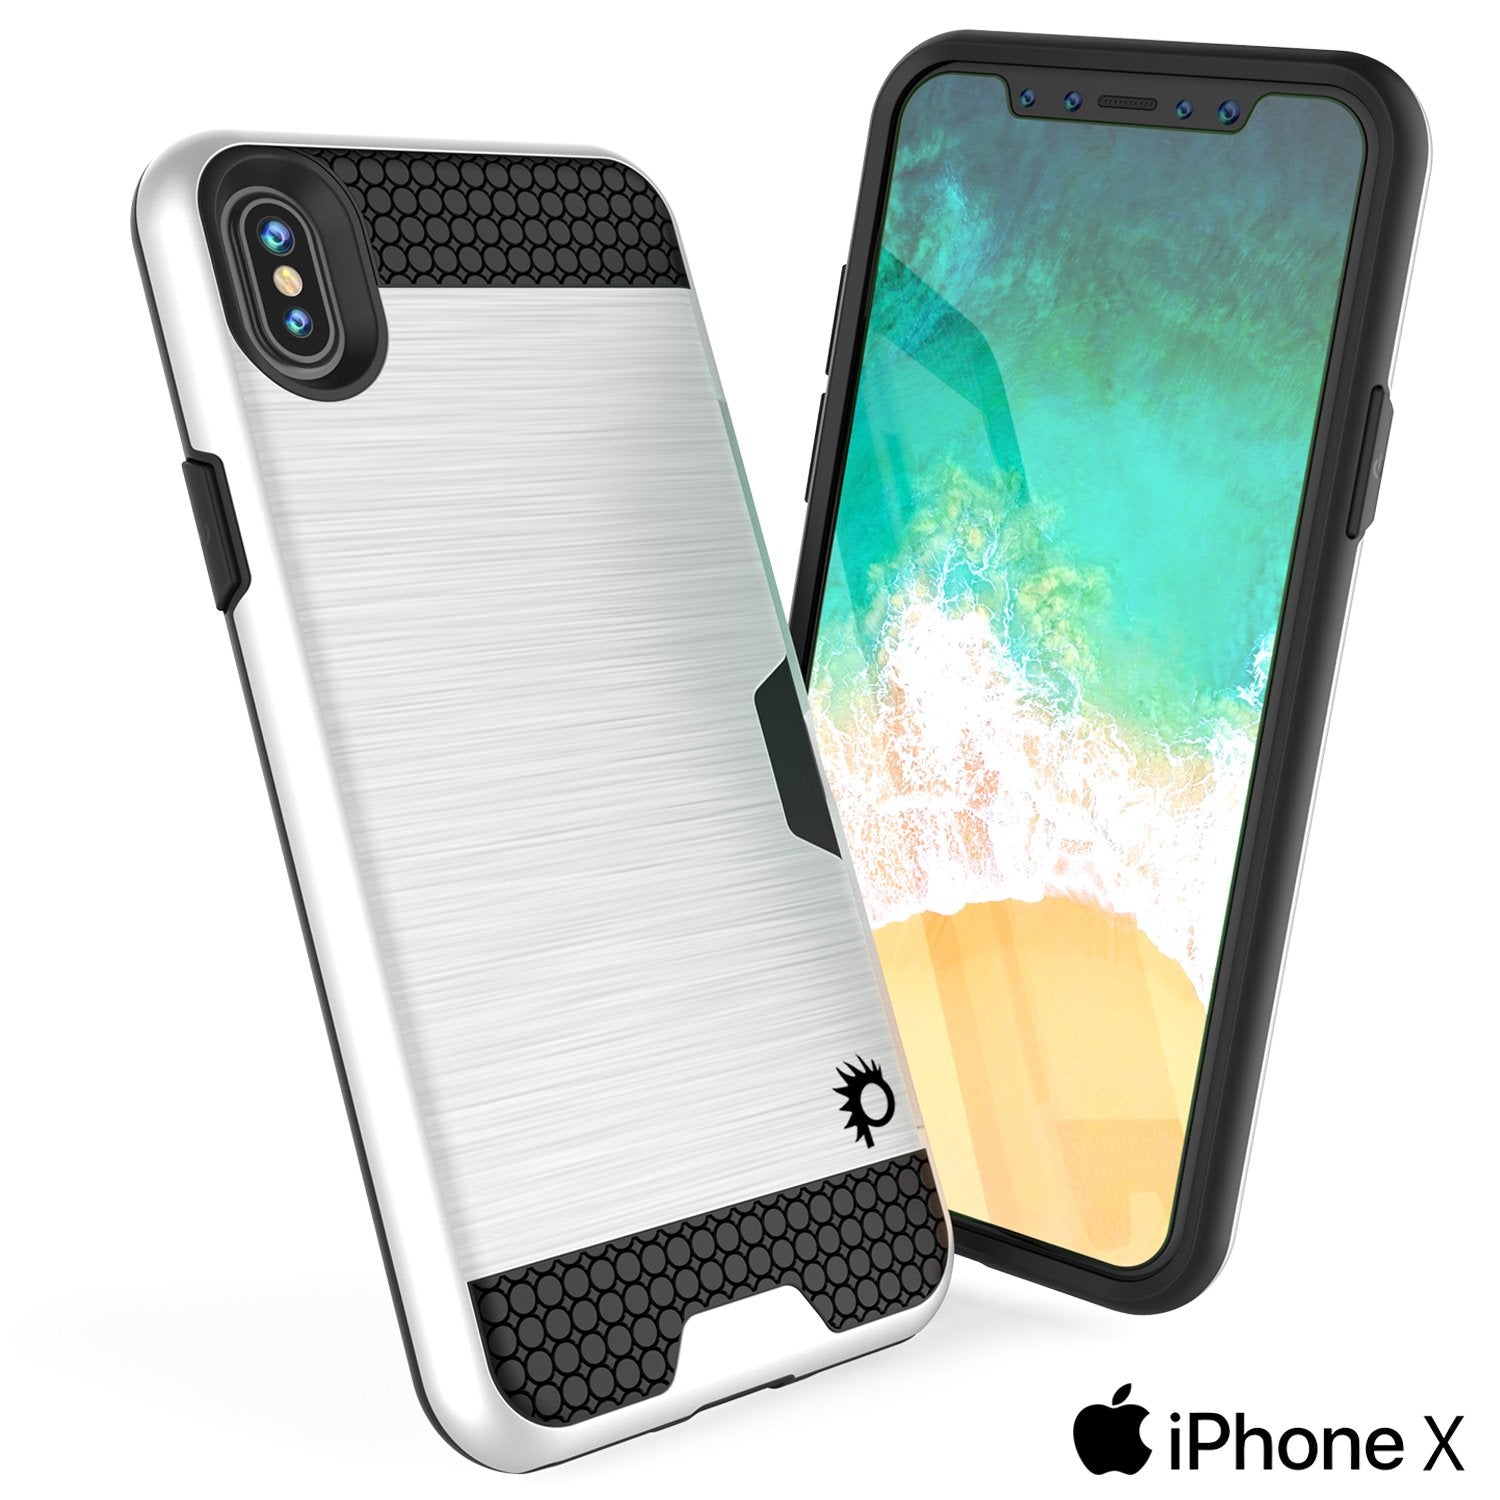 iPhone X Case, PUNKcase [SLOT Series] Slim Fit Dual-Layer Armor Cover & Tempered Glass PUNKSHIELD Screen Protector for Apple iPhone X [White] - PunkCase NZ